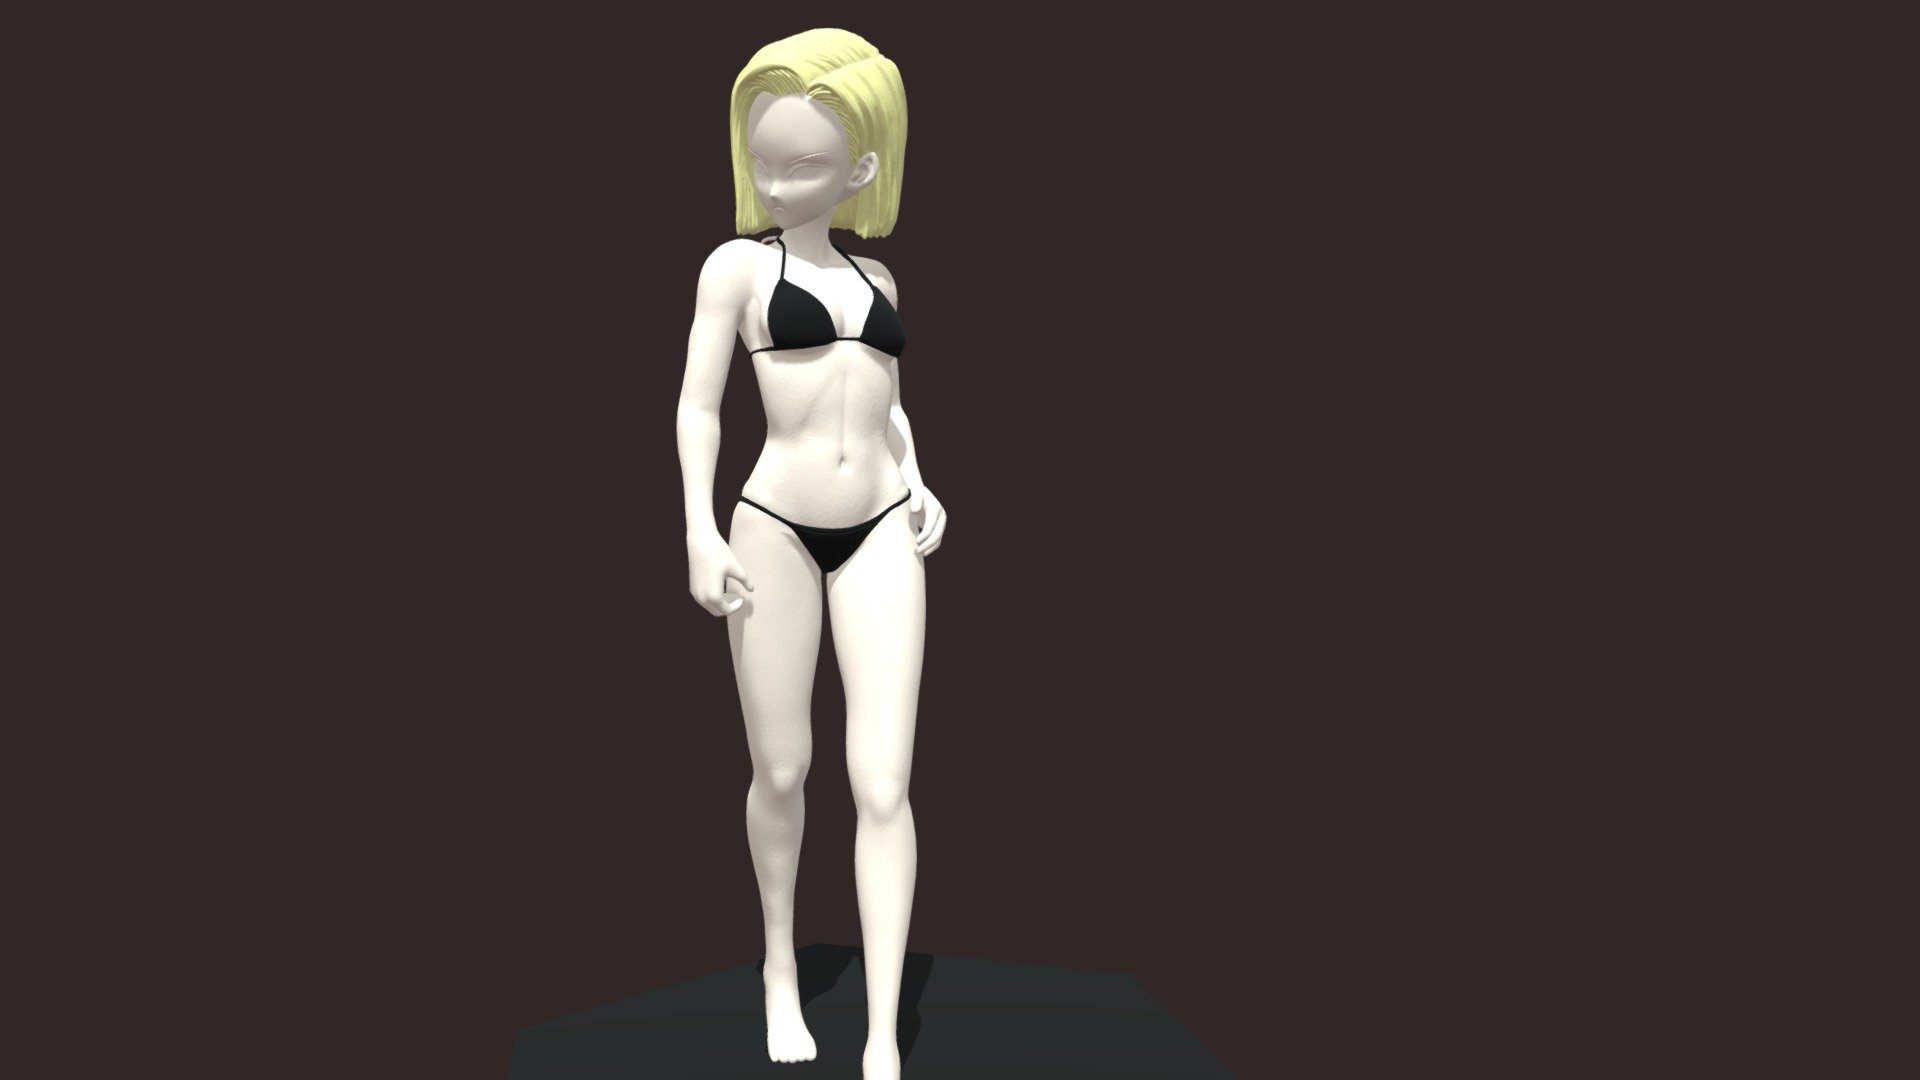 FBX, STL

This file is for 3d printer STL

To download this model you can enter our website and select the box “Modelos 3d” there you can find our downloadable models

Sculptures, canvases and wall paintings are ONLY SOLD TO COSTA RICA

https://animeparadisecr.wixsite.com/my-site - No18 - 3D model by Anime paradise CR (@animeparadisecr) 3d model